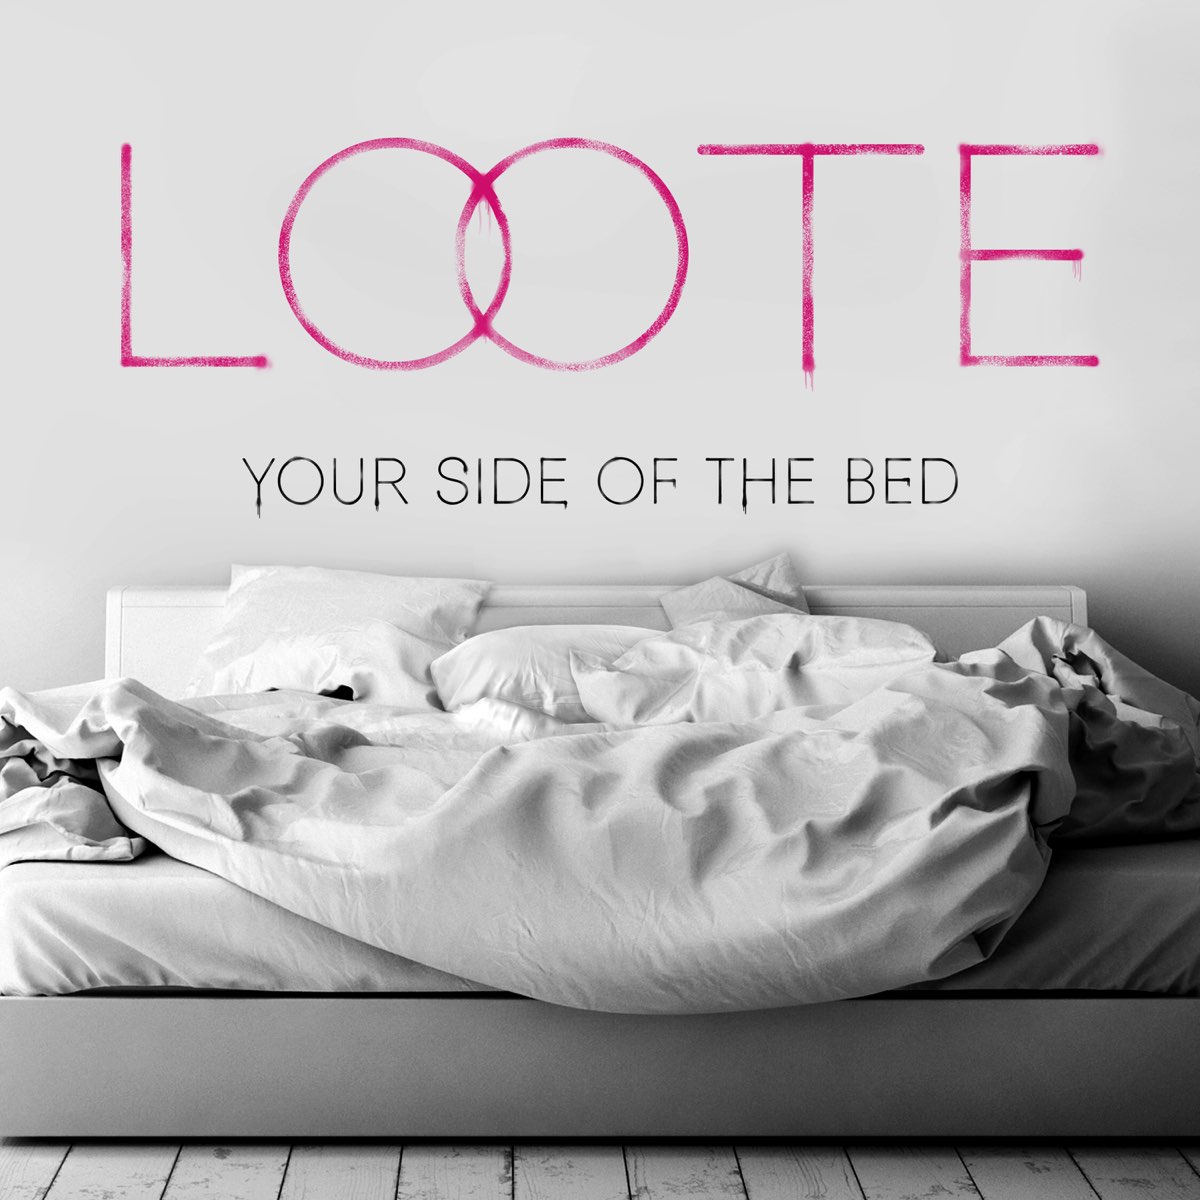 Your Side of the Bed - EP by Loote on Apple Music